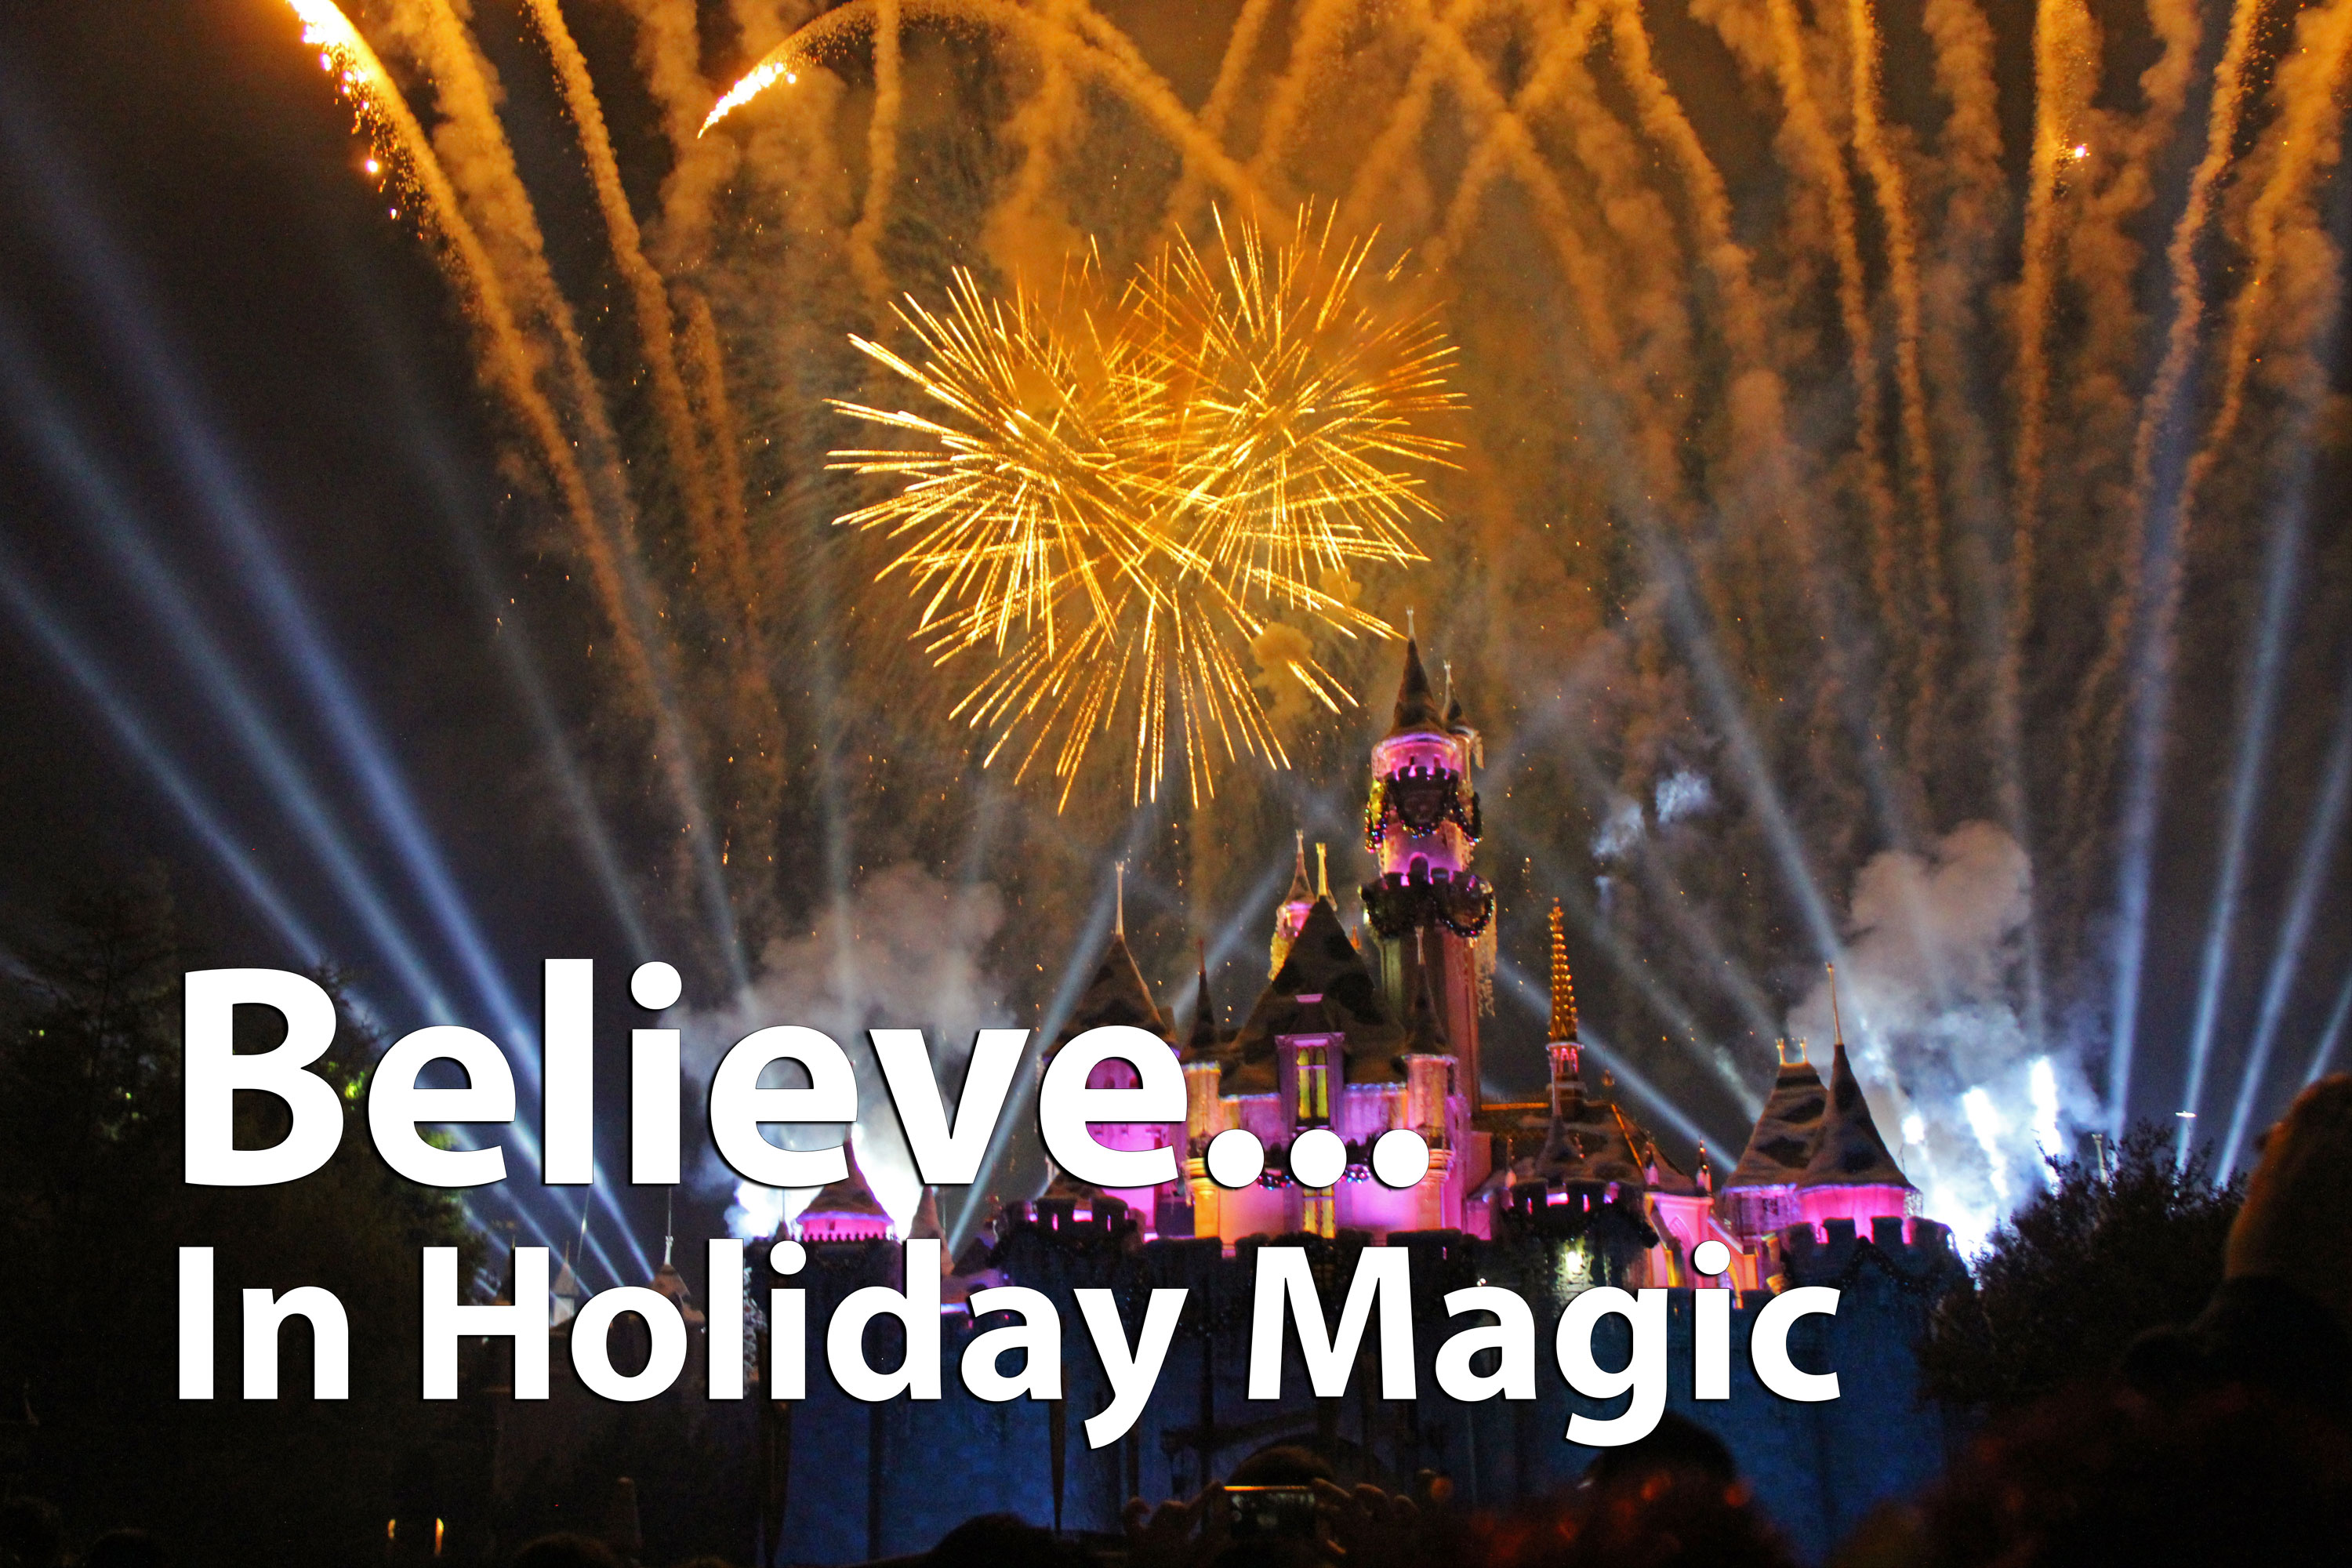 Believe... In Holiday Magic